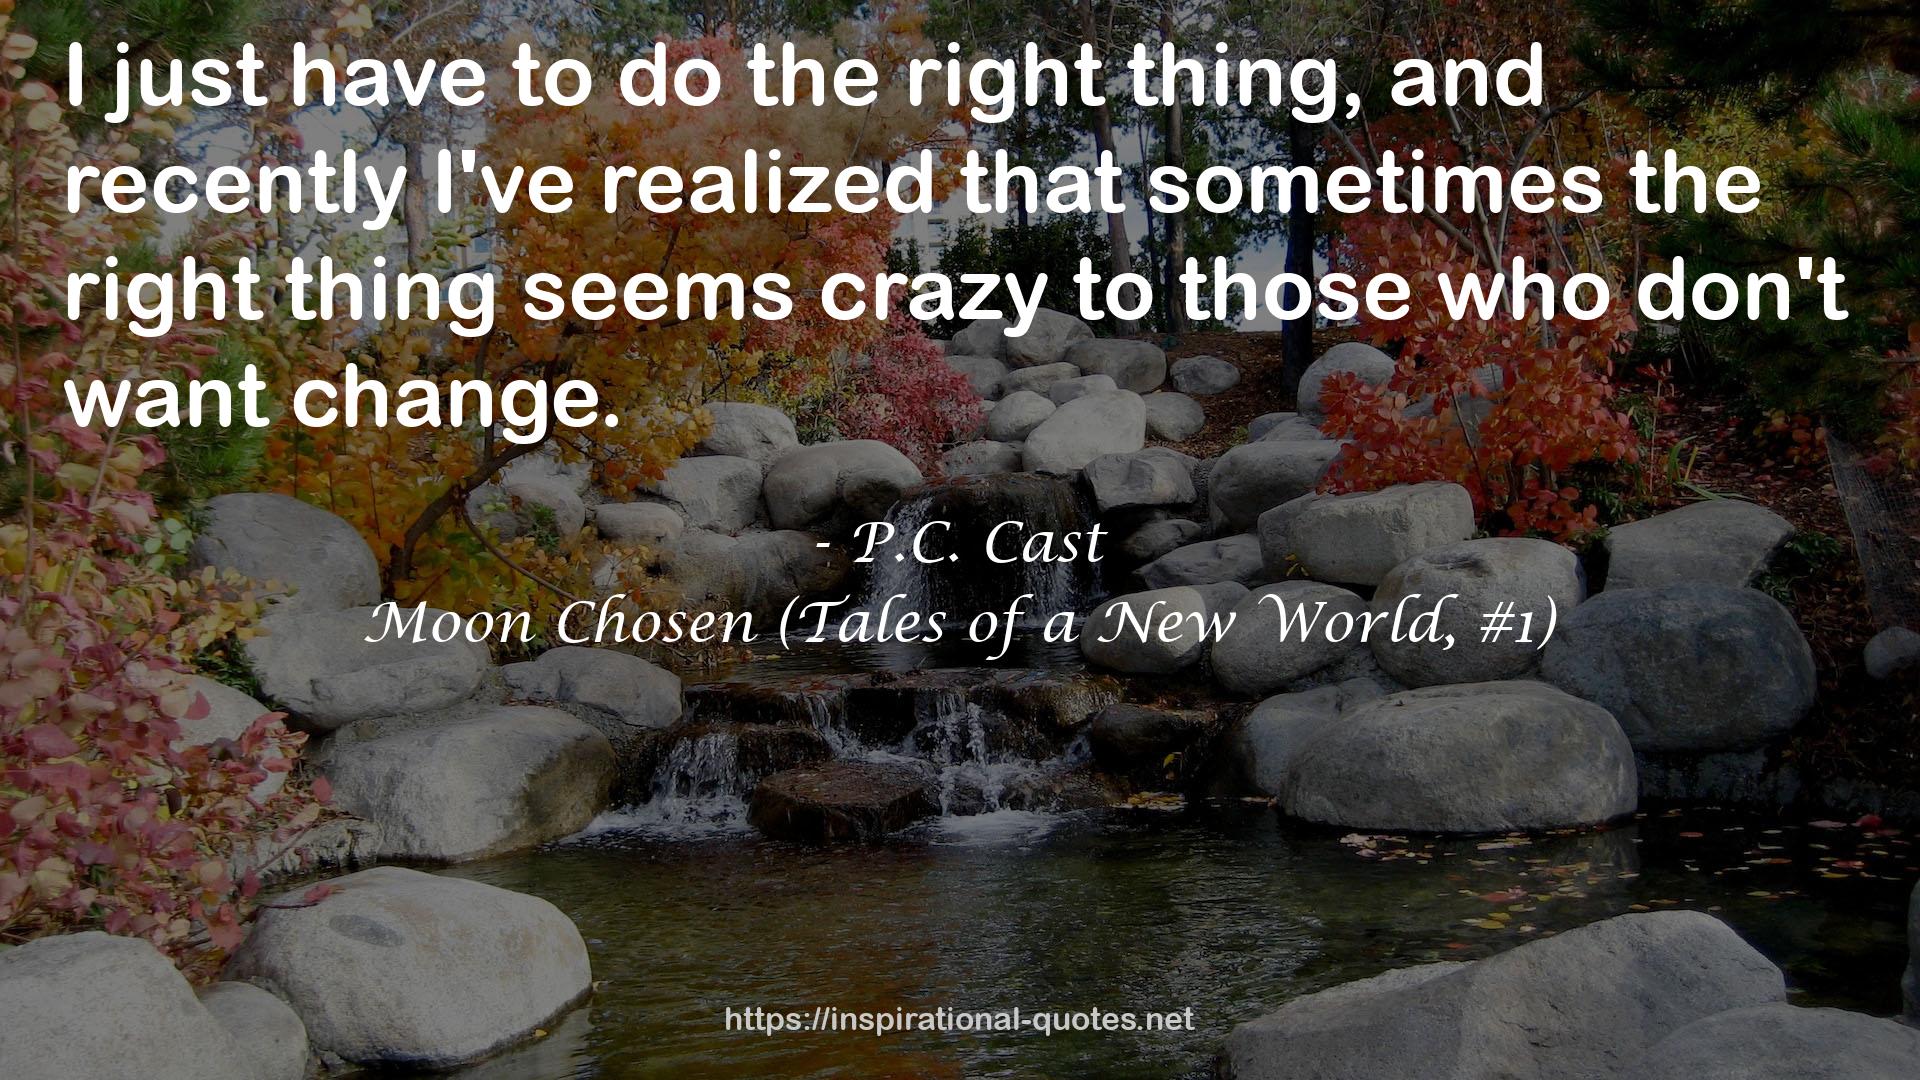 Moon Chosen (Tales of a New World, #1) QUOTES